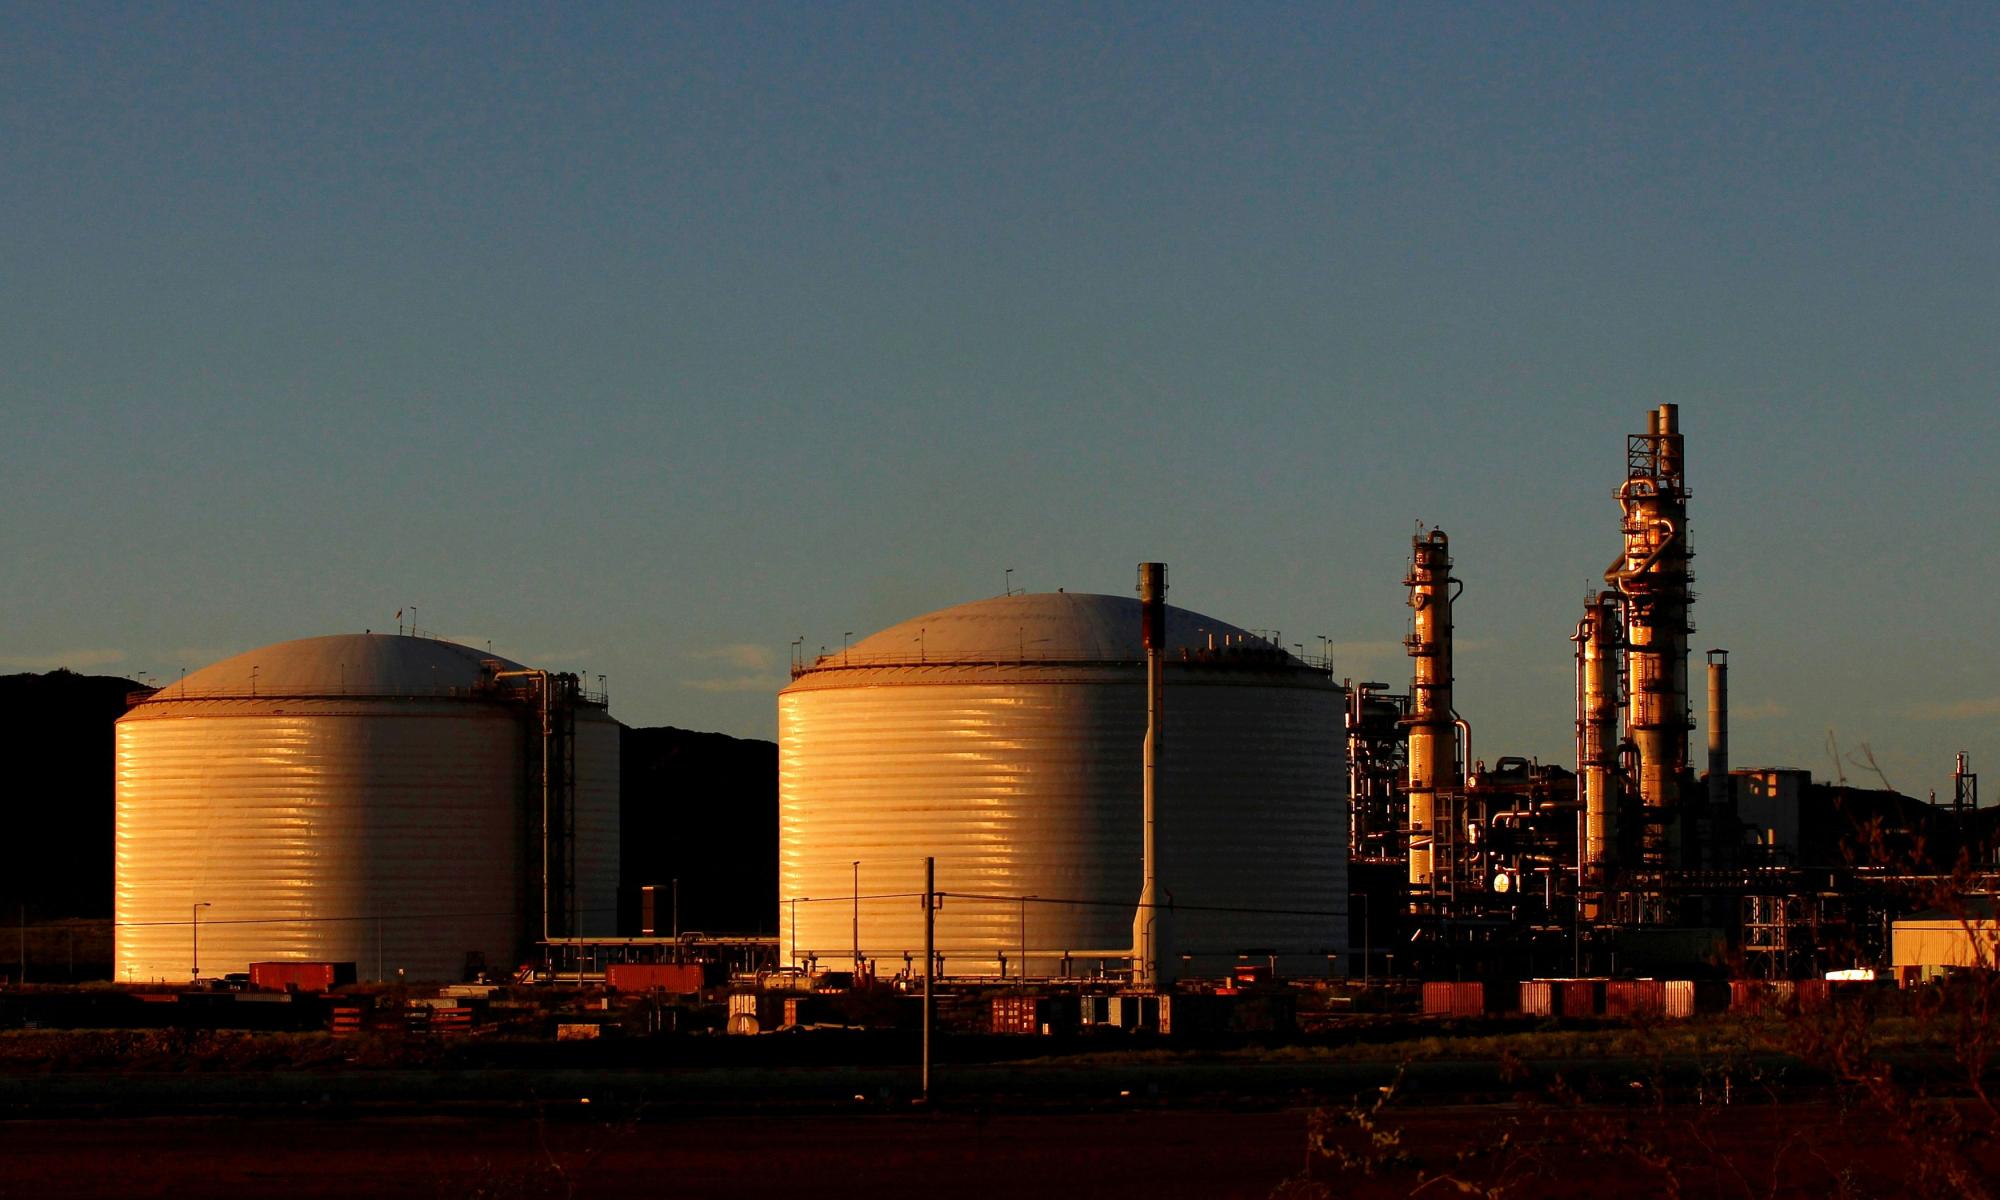 Methane released in gas production means Australia's emissions may be 10% higher than reported